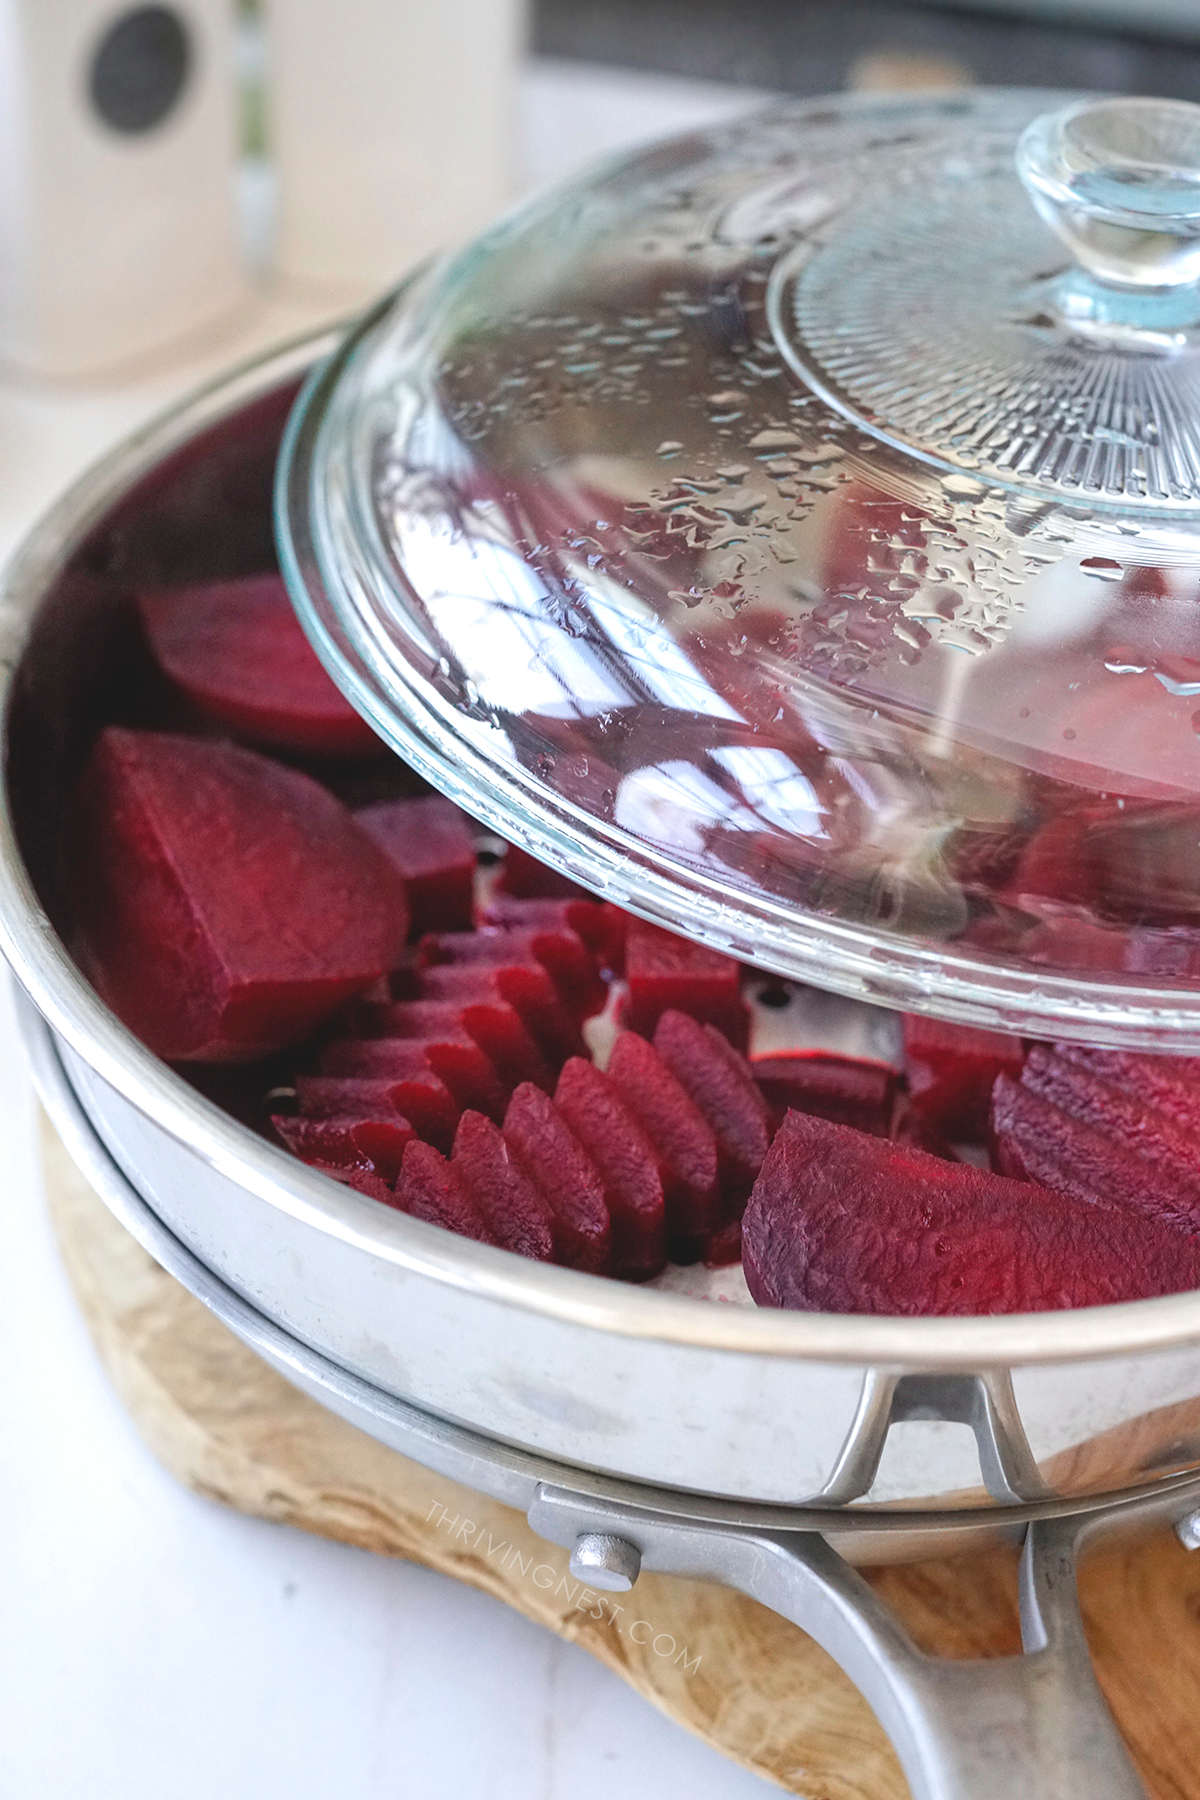 Steaming beetroot cut into cubes strips or rounds for babies as baby led weaning.